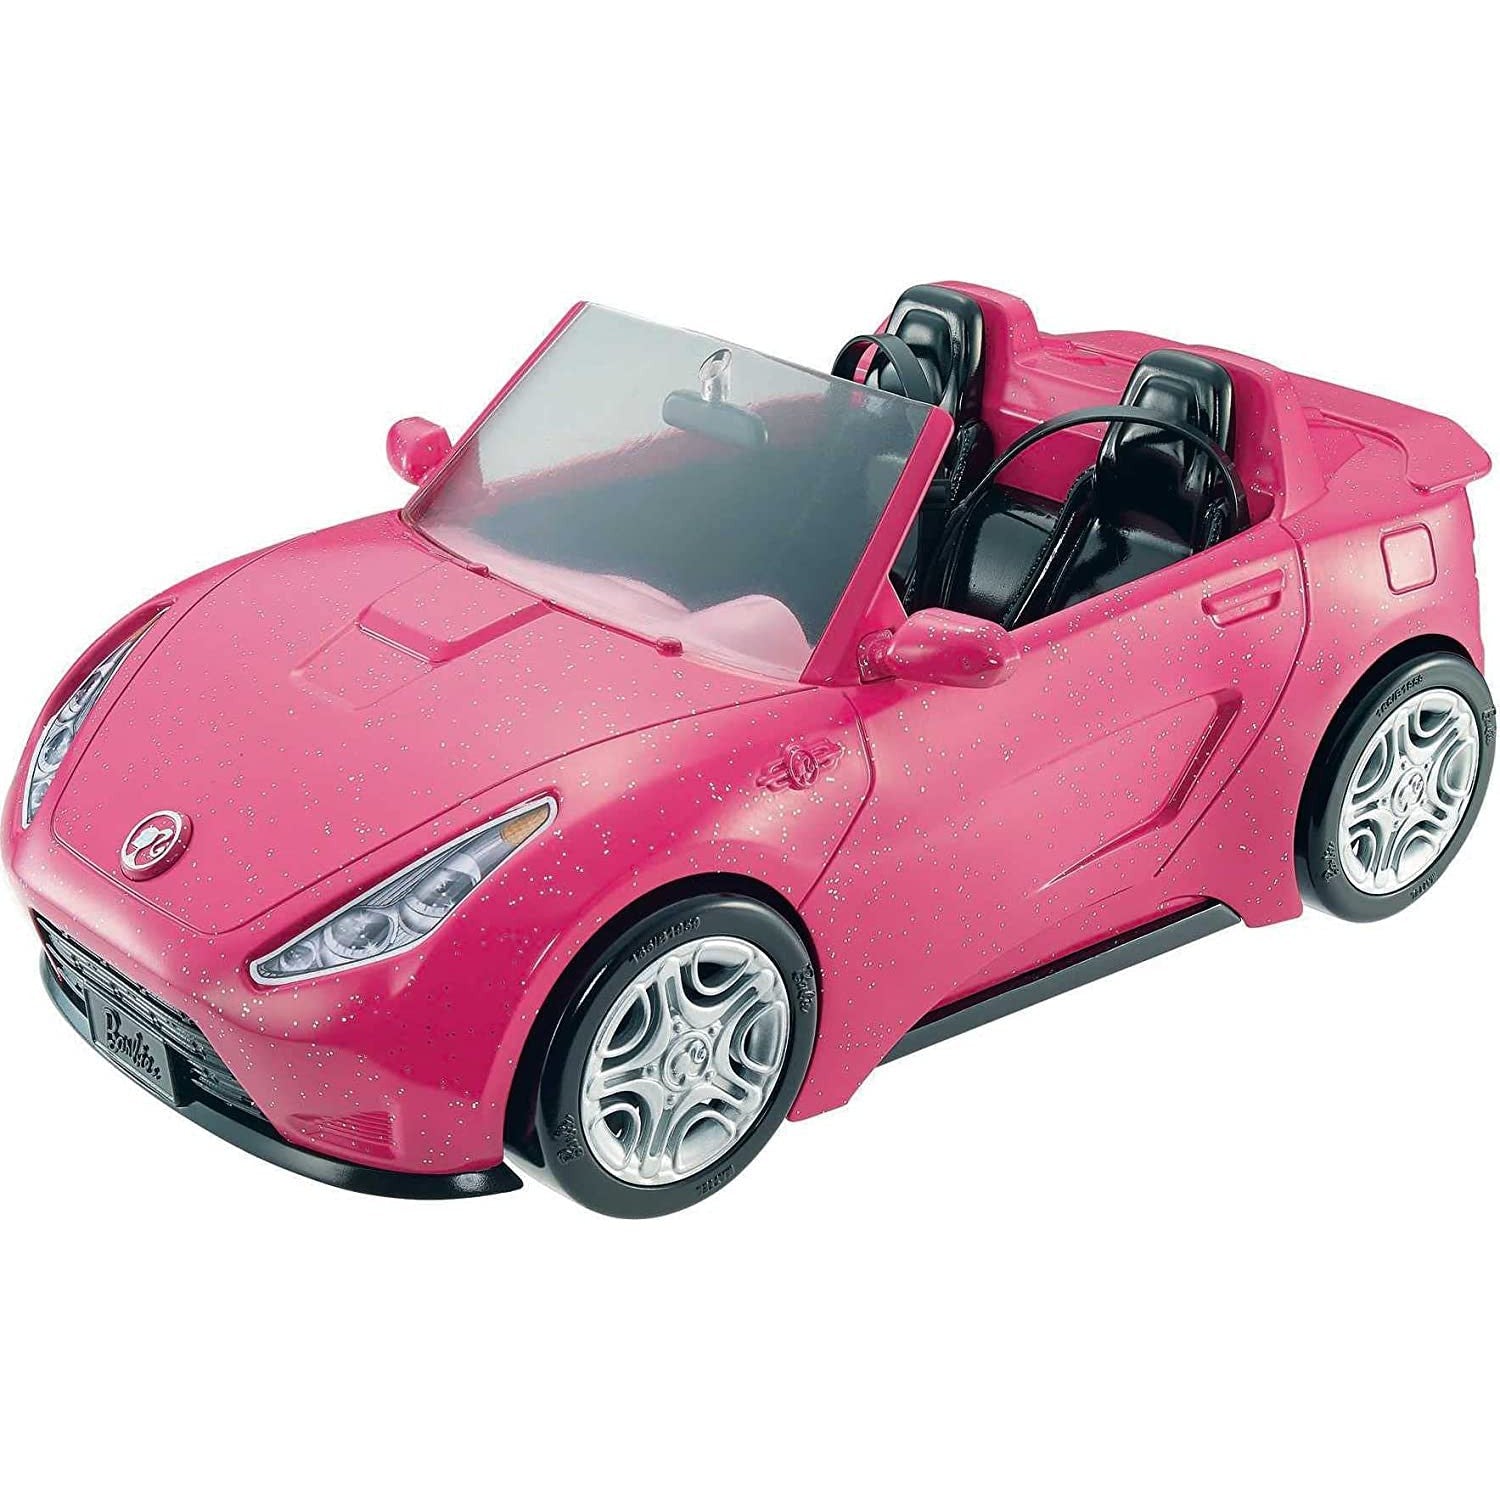 Museum Omkreds mentalitet Barbie Glam Pink Convertible Car – McGreevy's Toys Direct